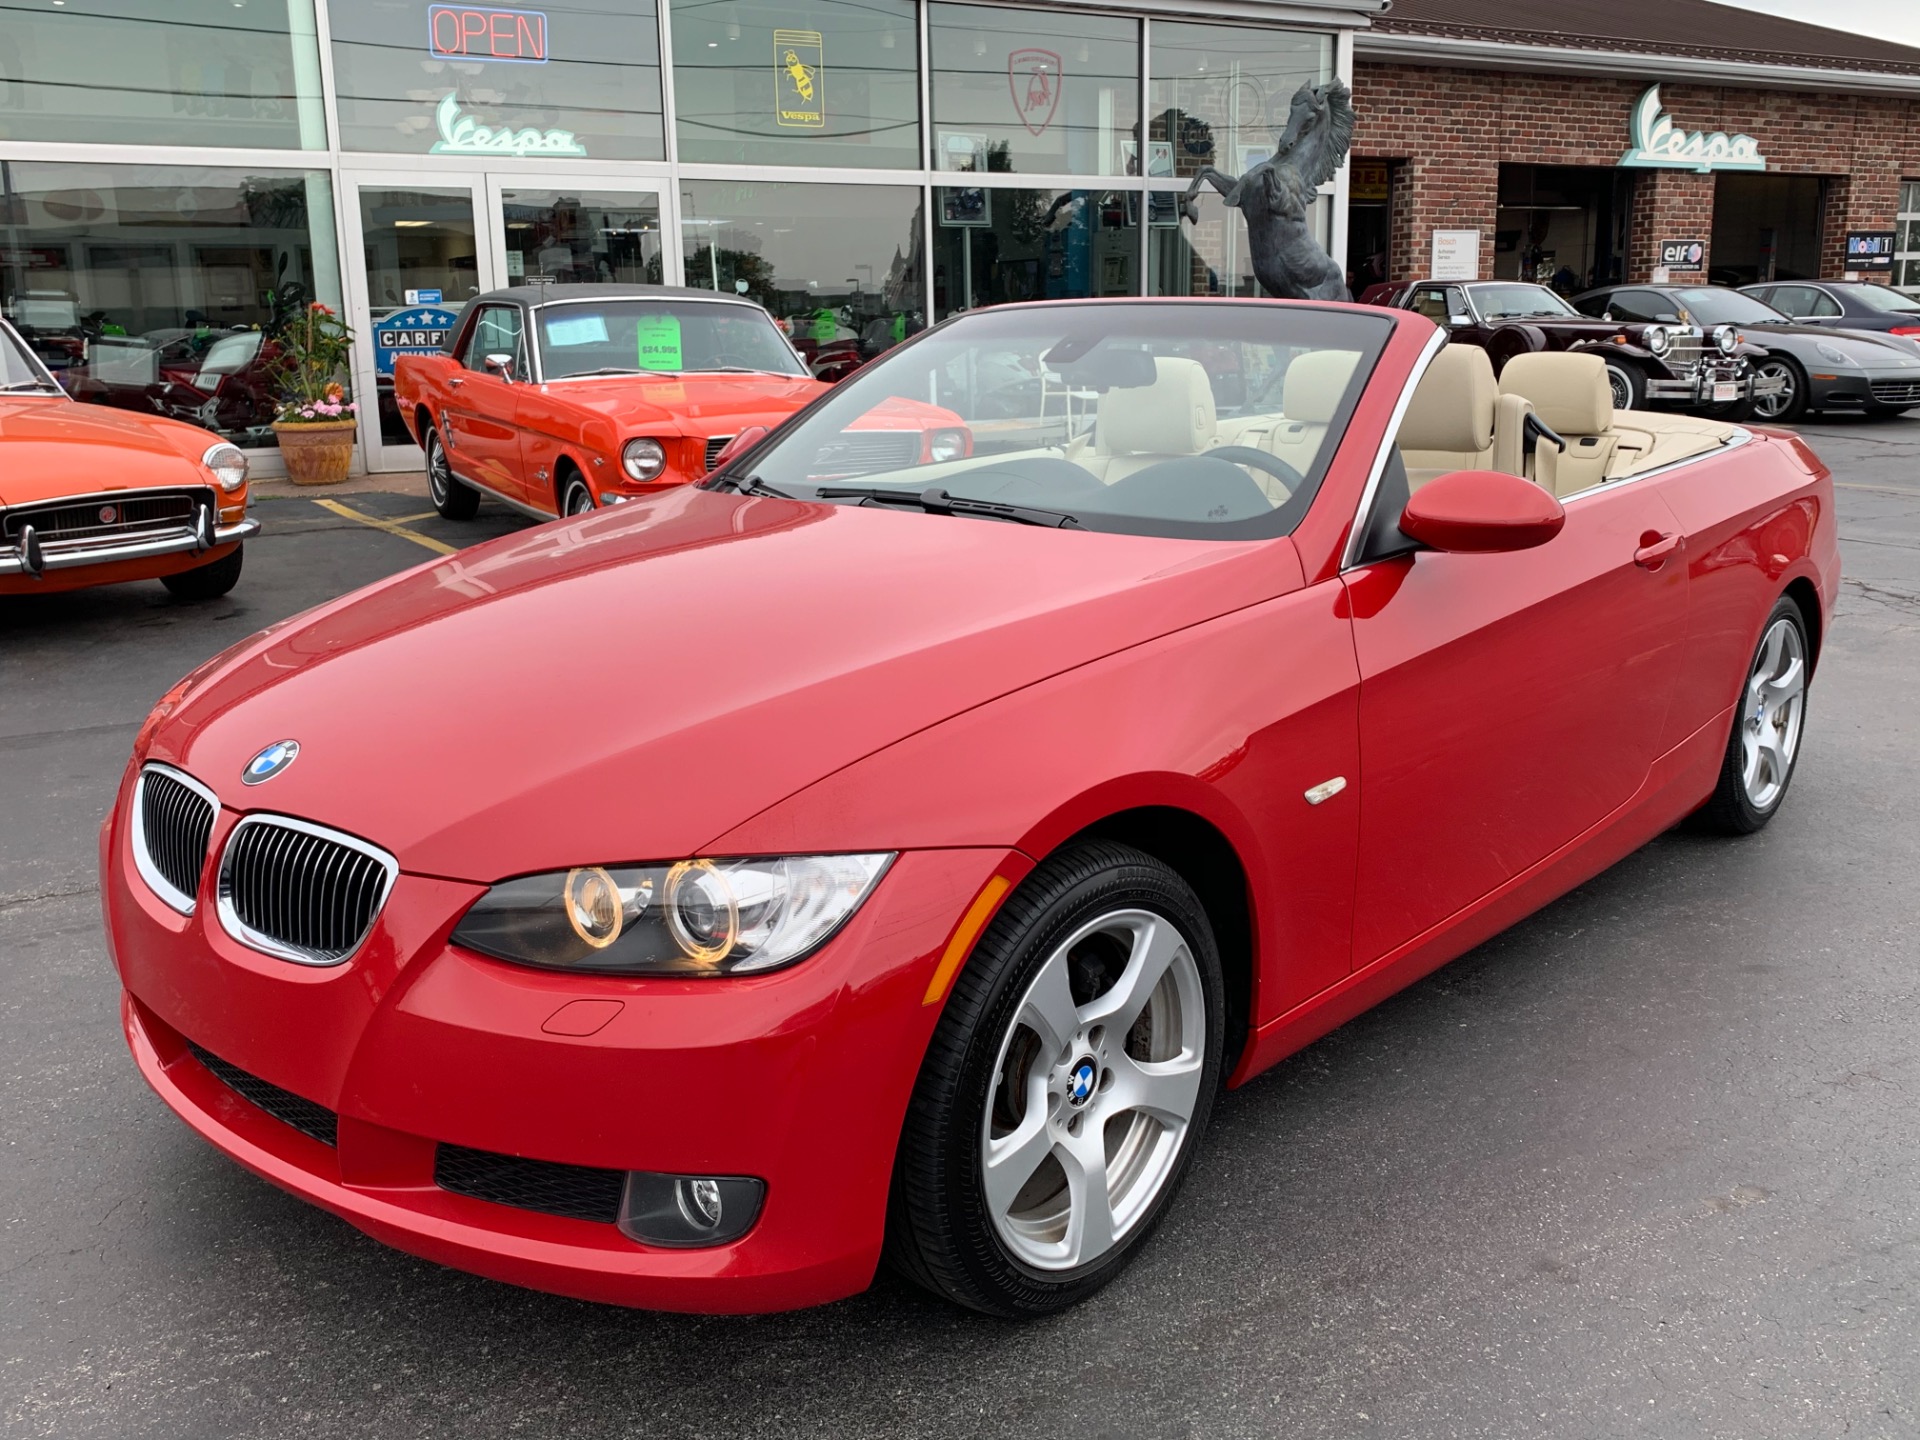 2009 BMW 3 Series 328i Convertible Stock 3657 for sale near Brookfield, WI | WI Dealer